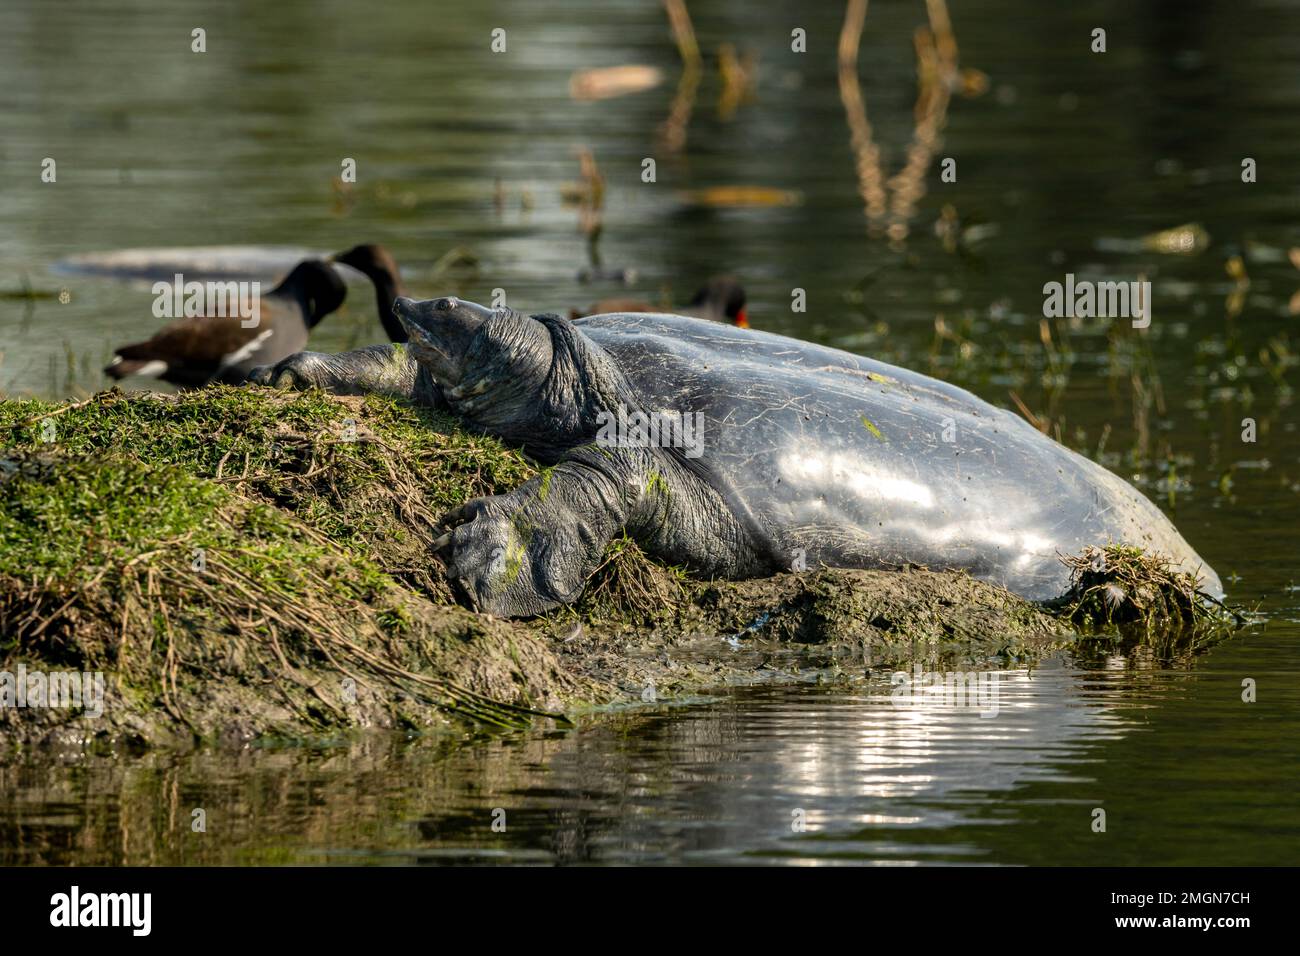 Nilssonia gangetica or Indian softshell or Ganges softshell turtle vulnerable species closeup with reflection in water basking in winter keoladeo Stock Photo